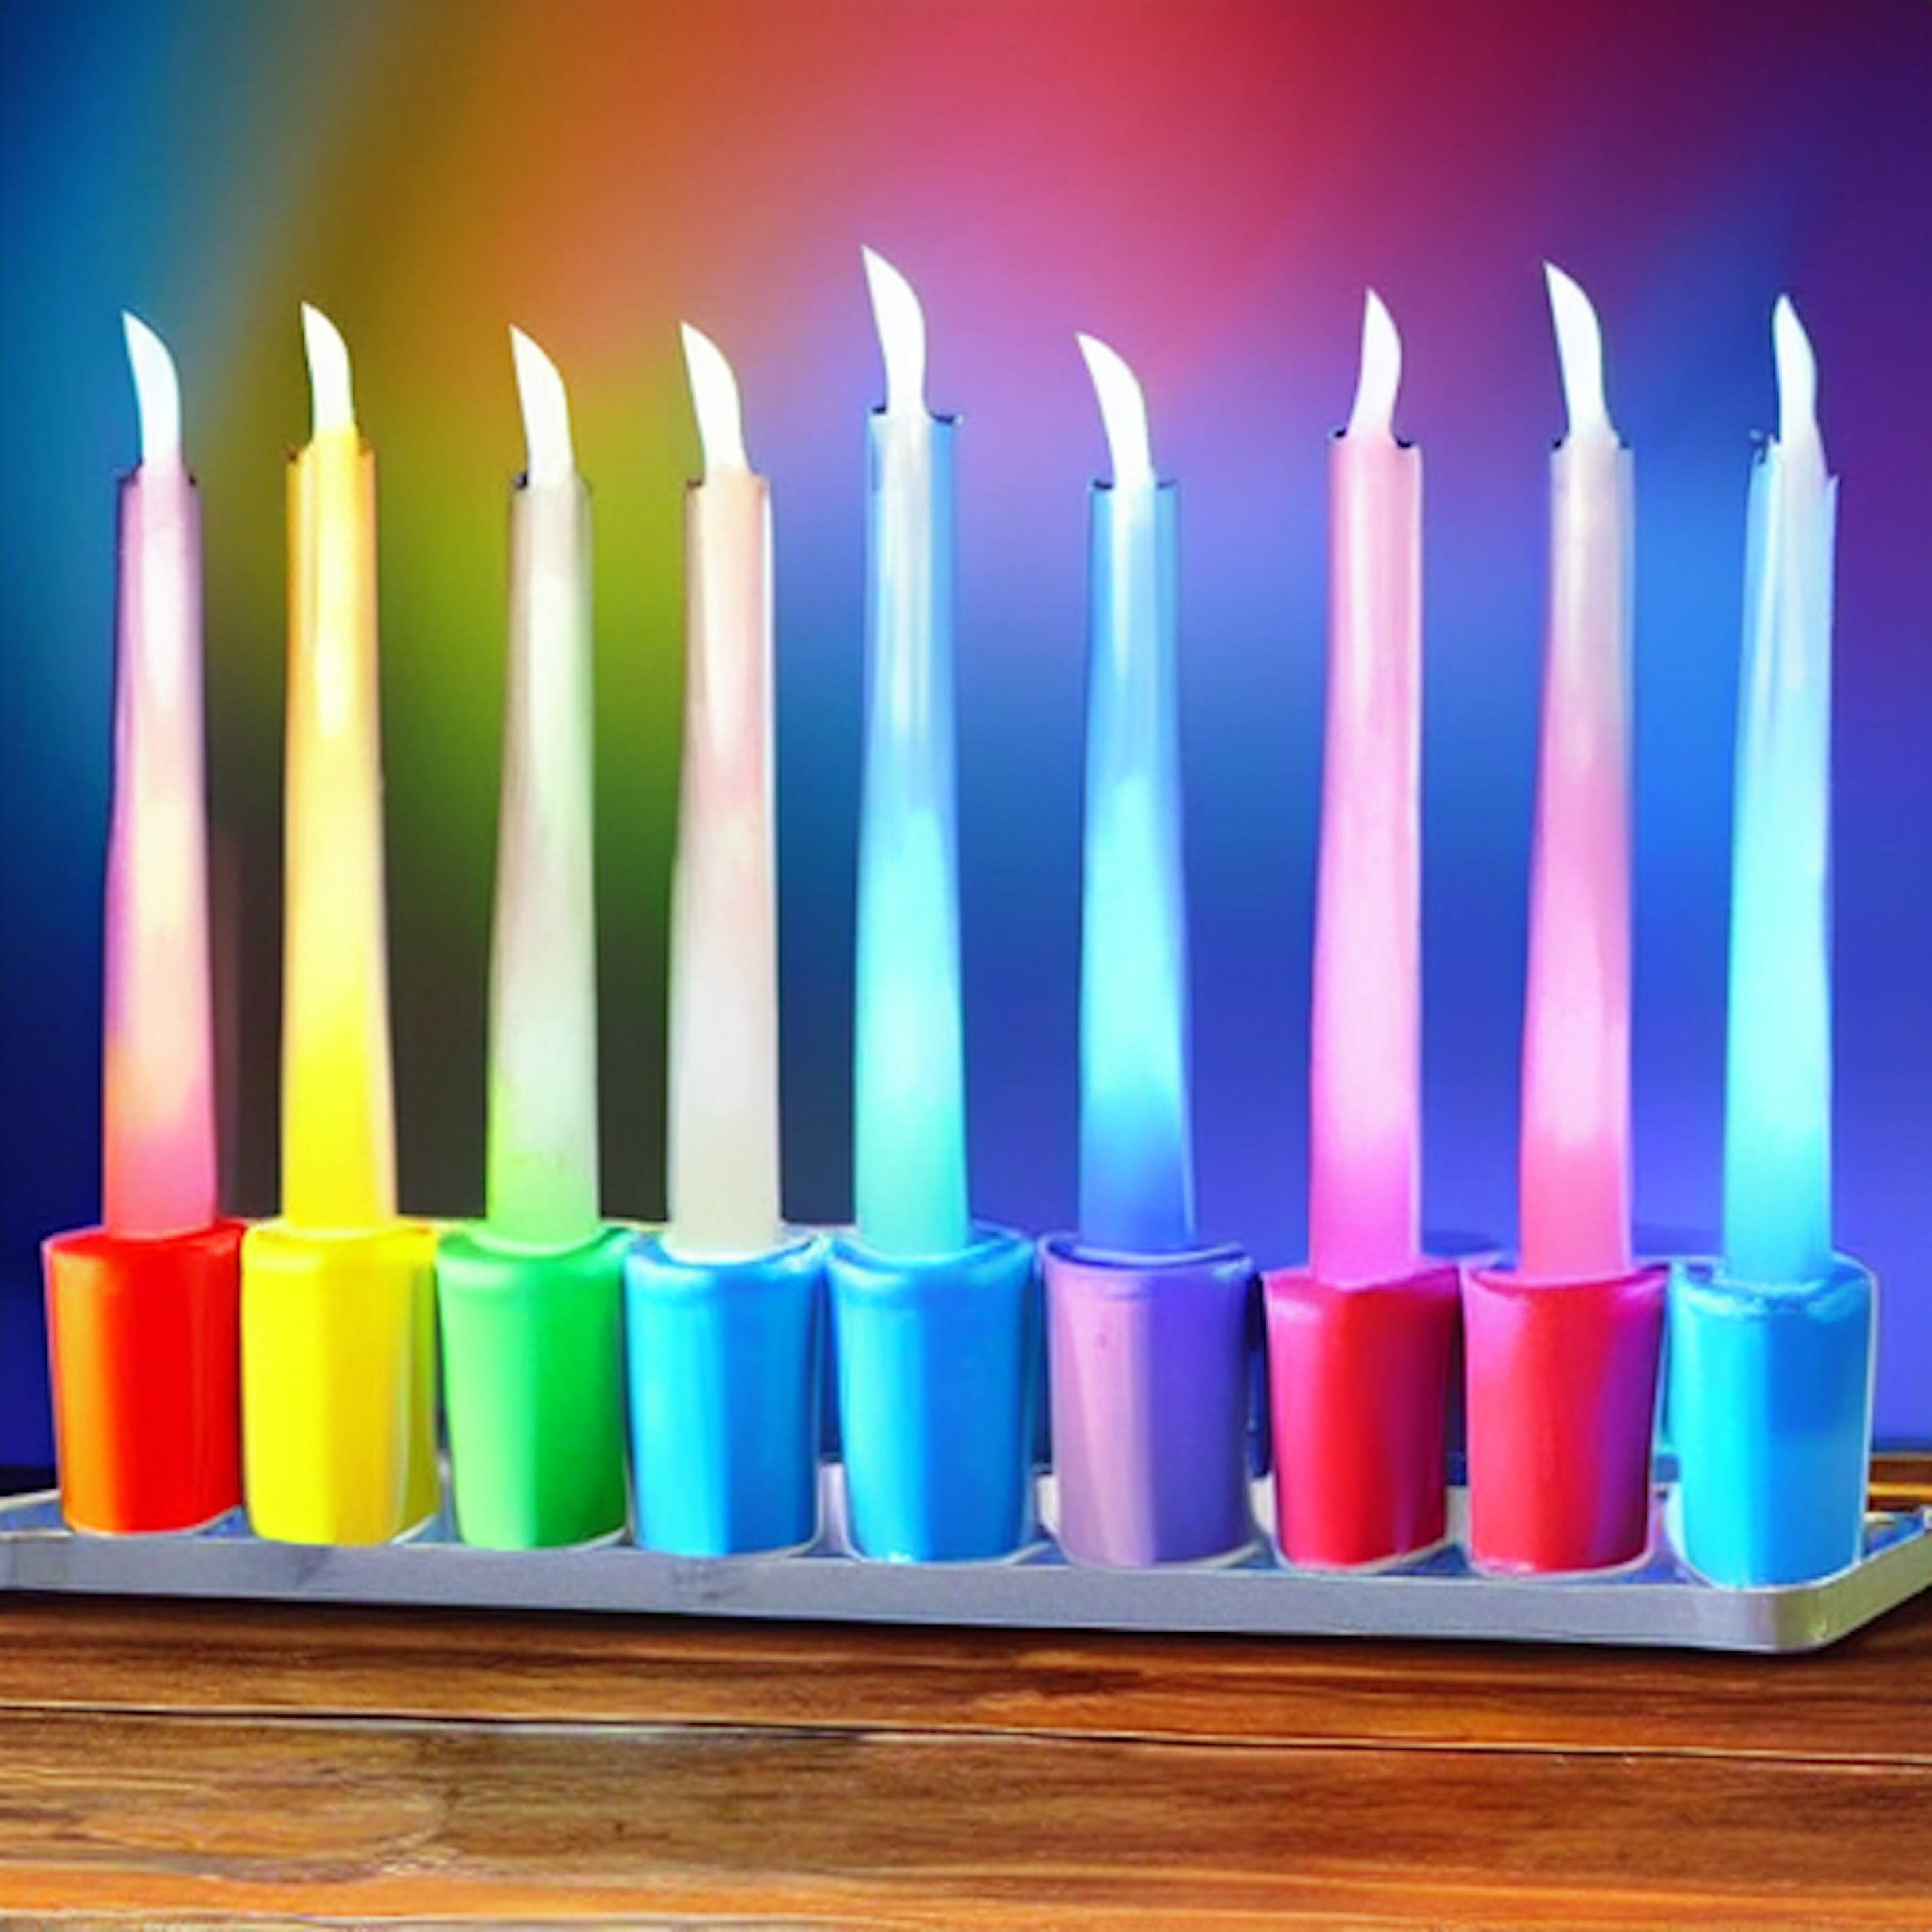 8 Lights:  ‘A Mitzvah Is As A Candle’